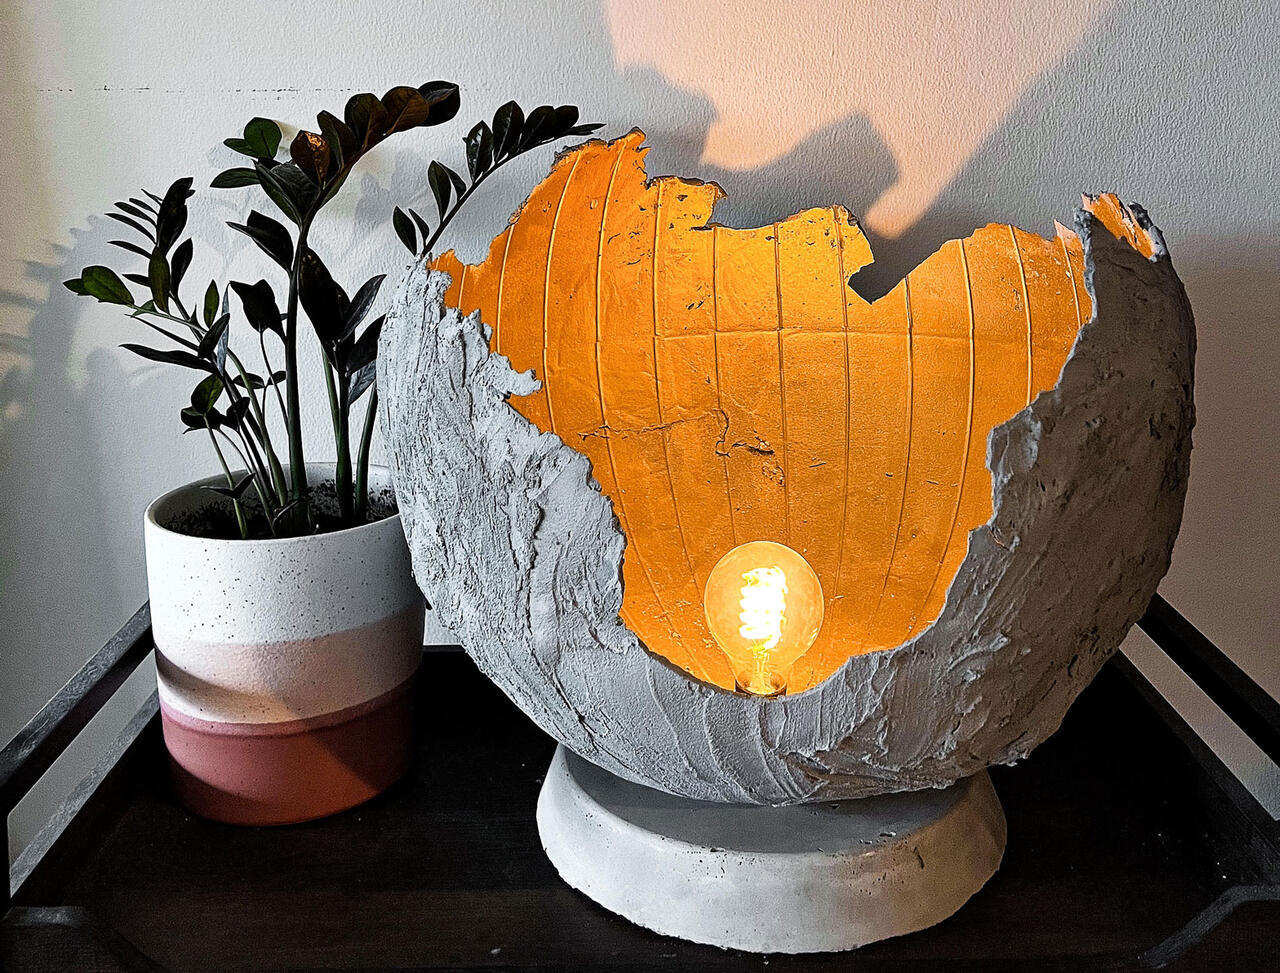 Handmade lamp next to a plant; the lamp appears to be made of paper mache